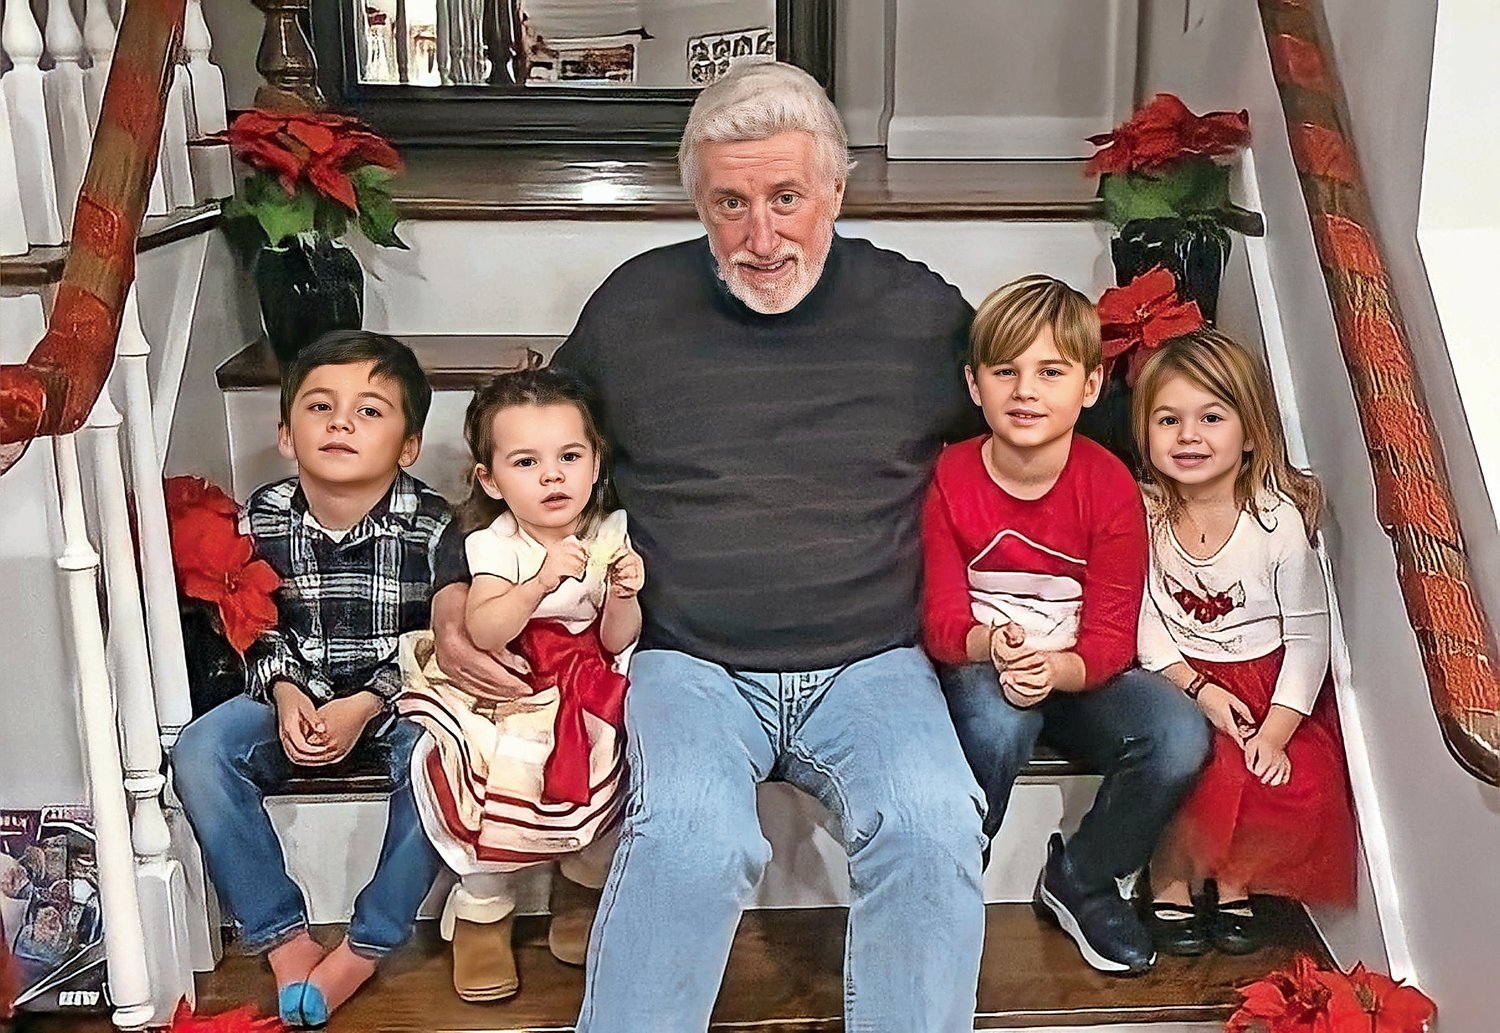 Jim McQuade with his four grandchildren, Luca, Sienna, Dylan and Madison.